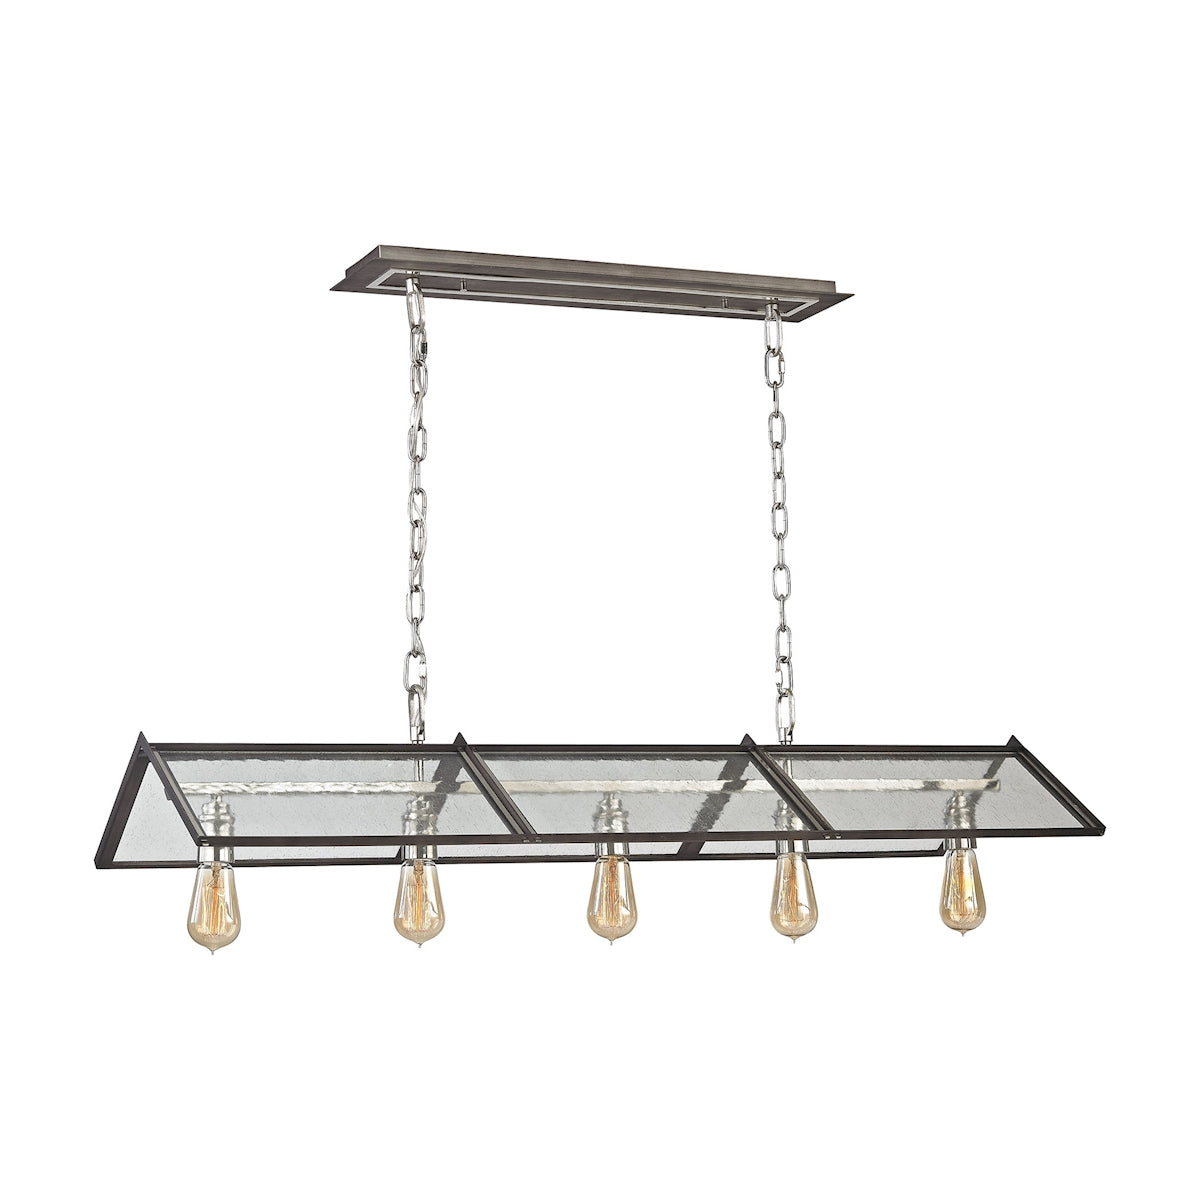 ELK Lighting 31963/5 Ridgeview 5-Light Chandelier in Polished Nickel and Weathered Zinc with Seedy Glass